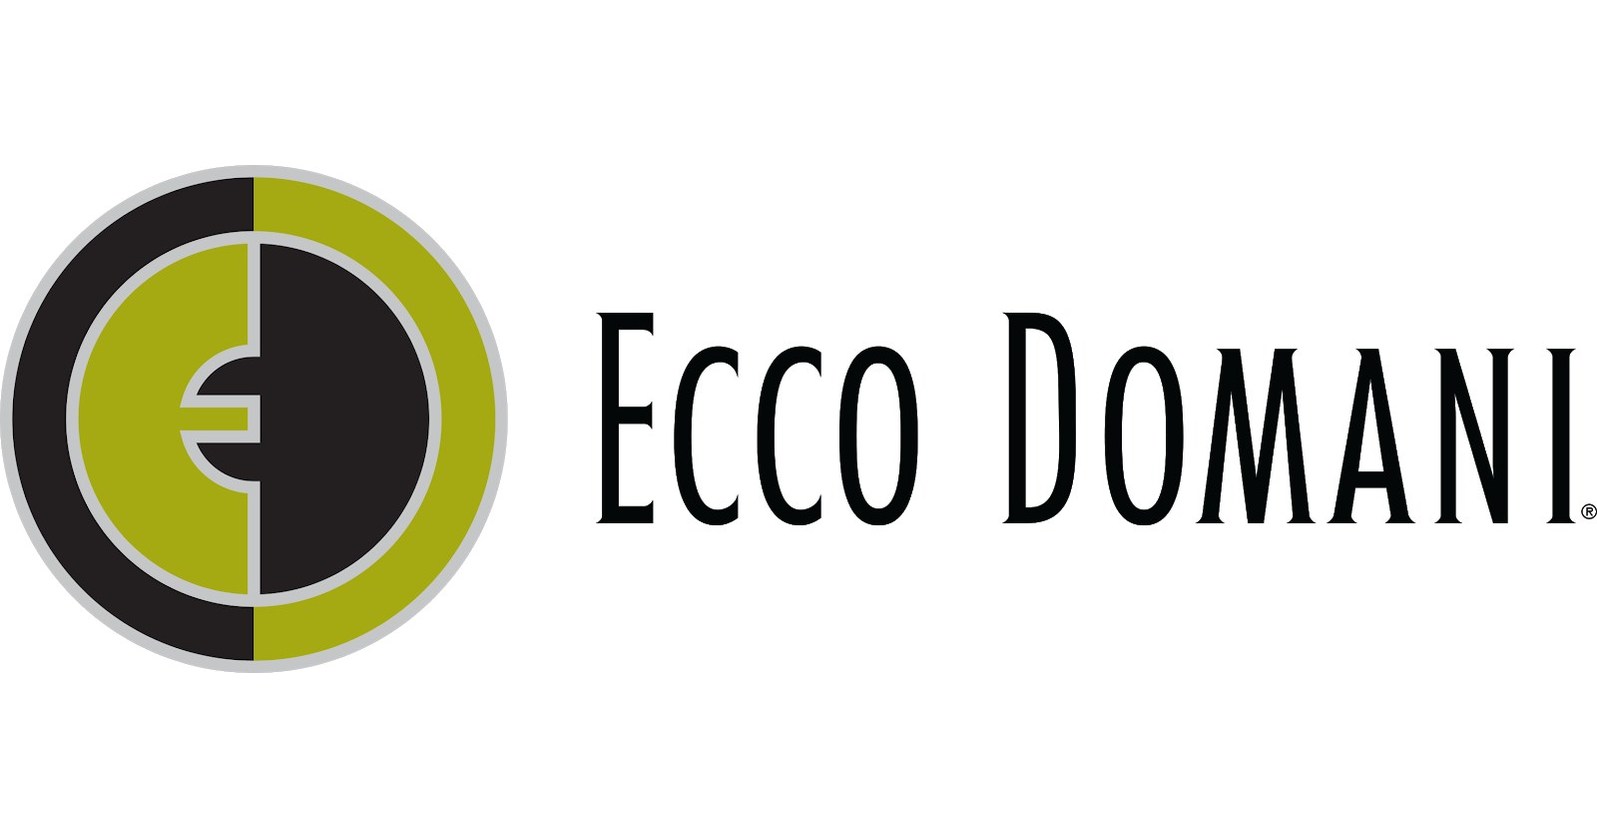 Bobby Berk Takes On Ecco Domani® Bottle For His Latest Design Project